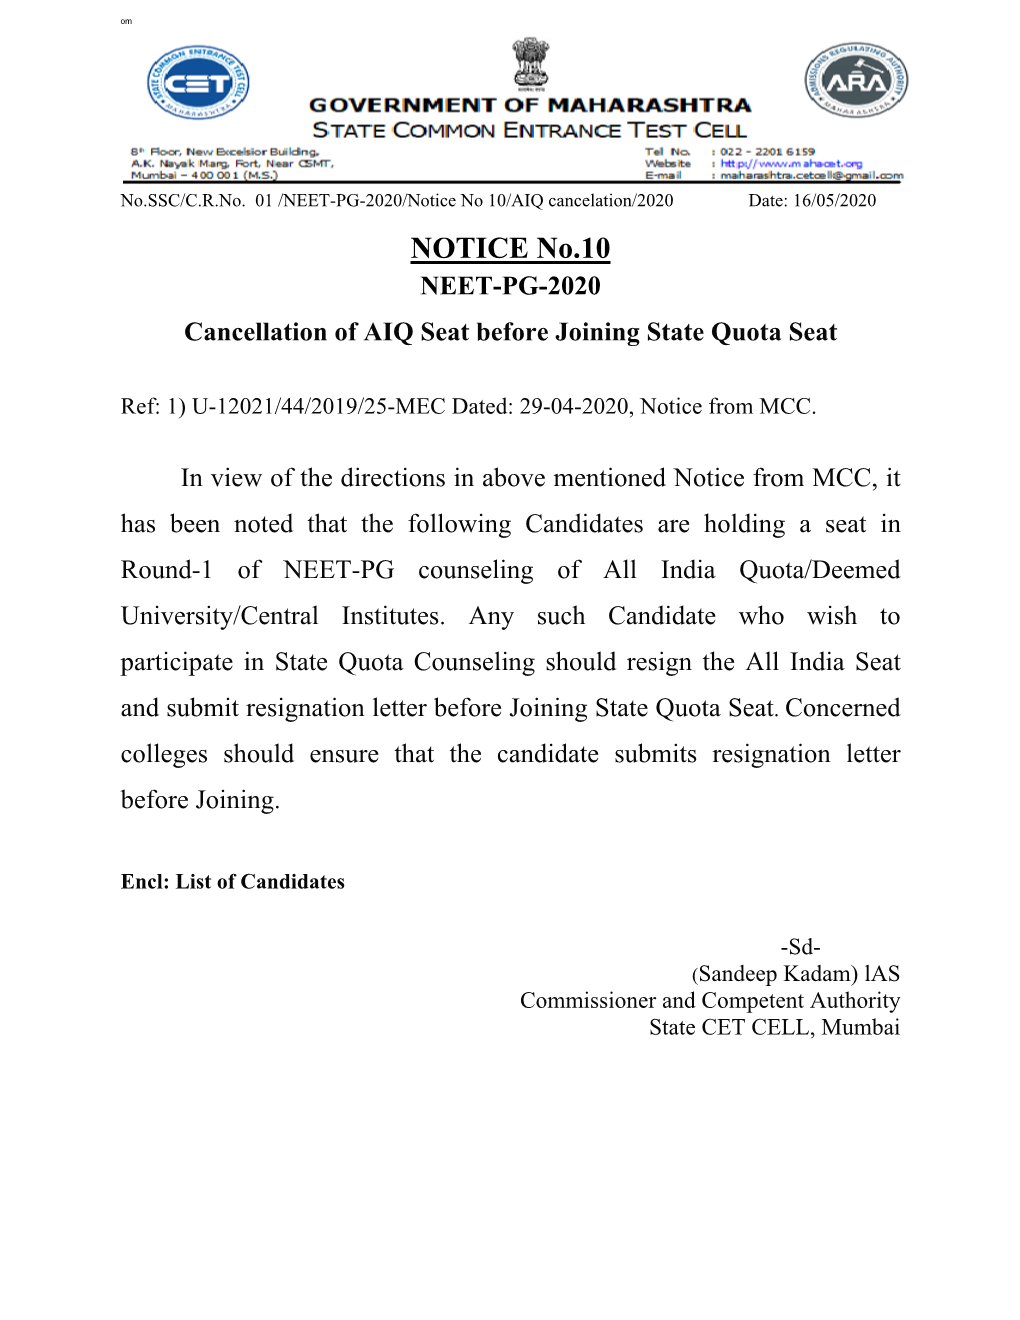 Notice No 10 Cancellation of AIQ Seat Before Joining State Counseling Seat